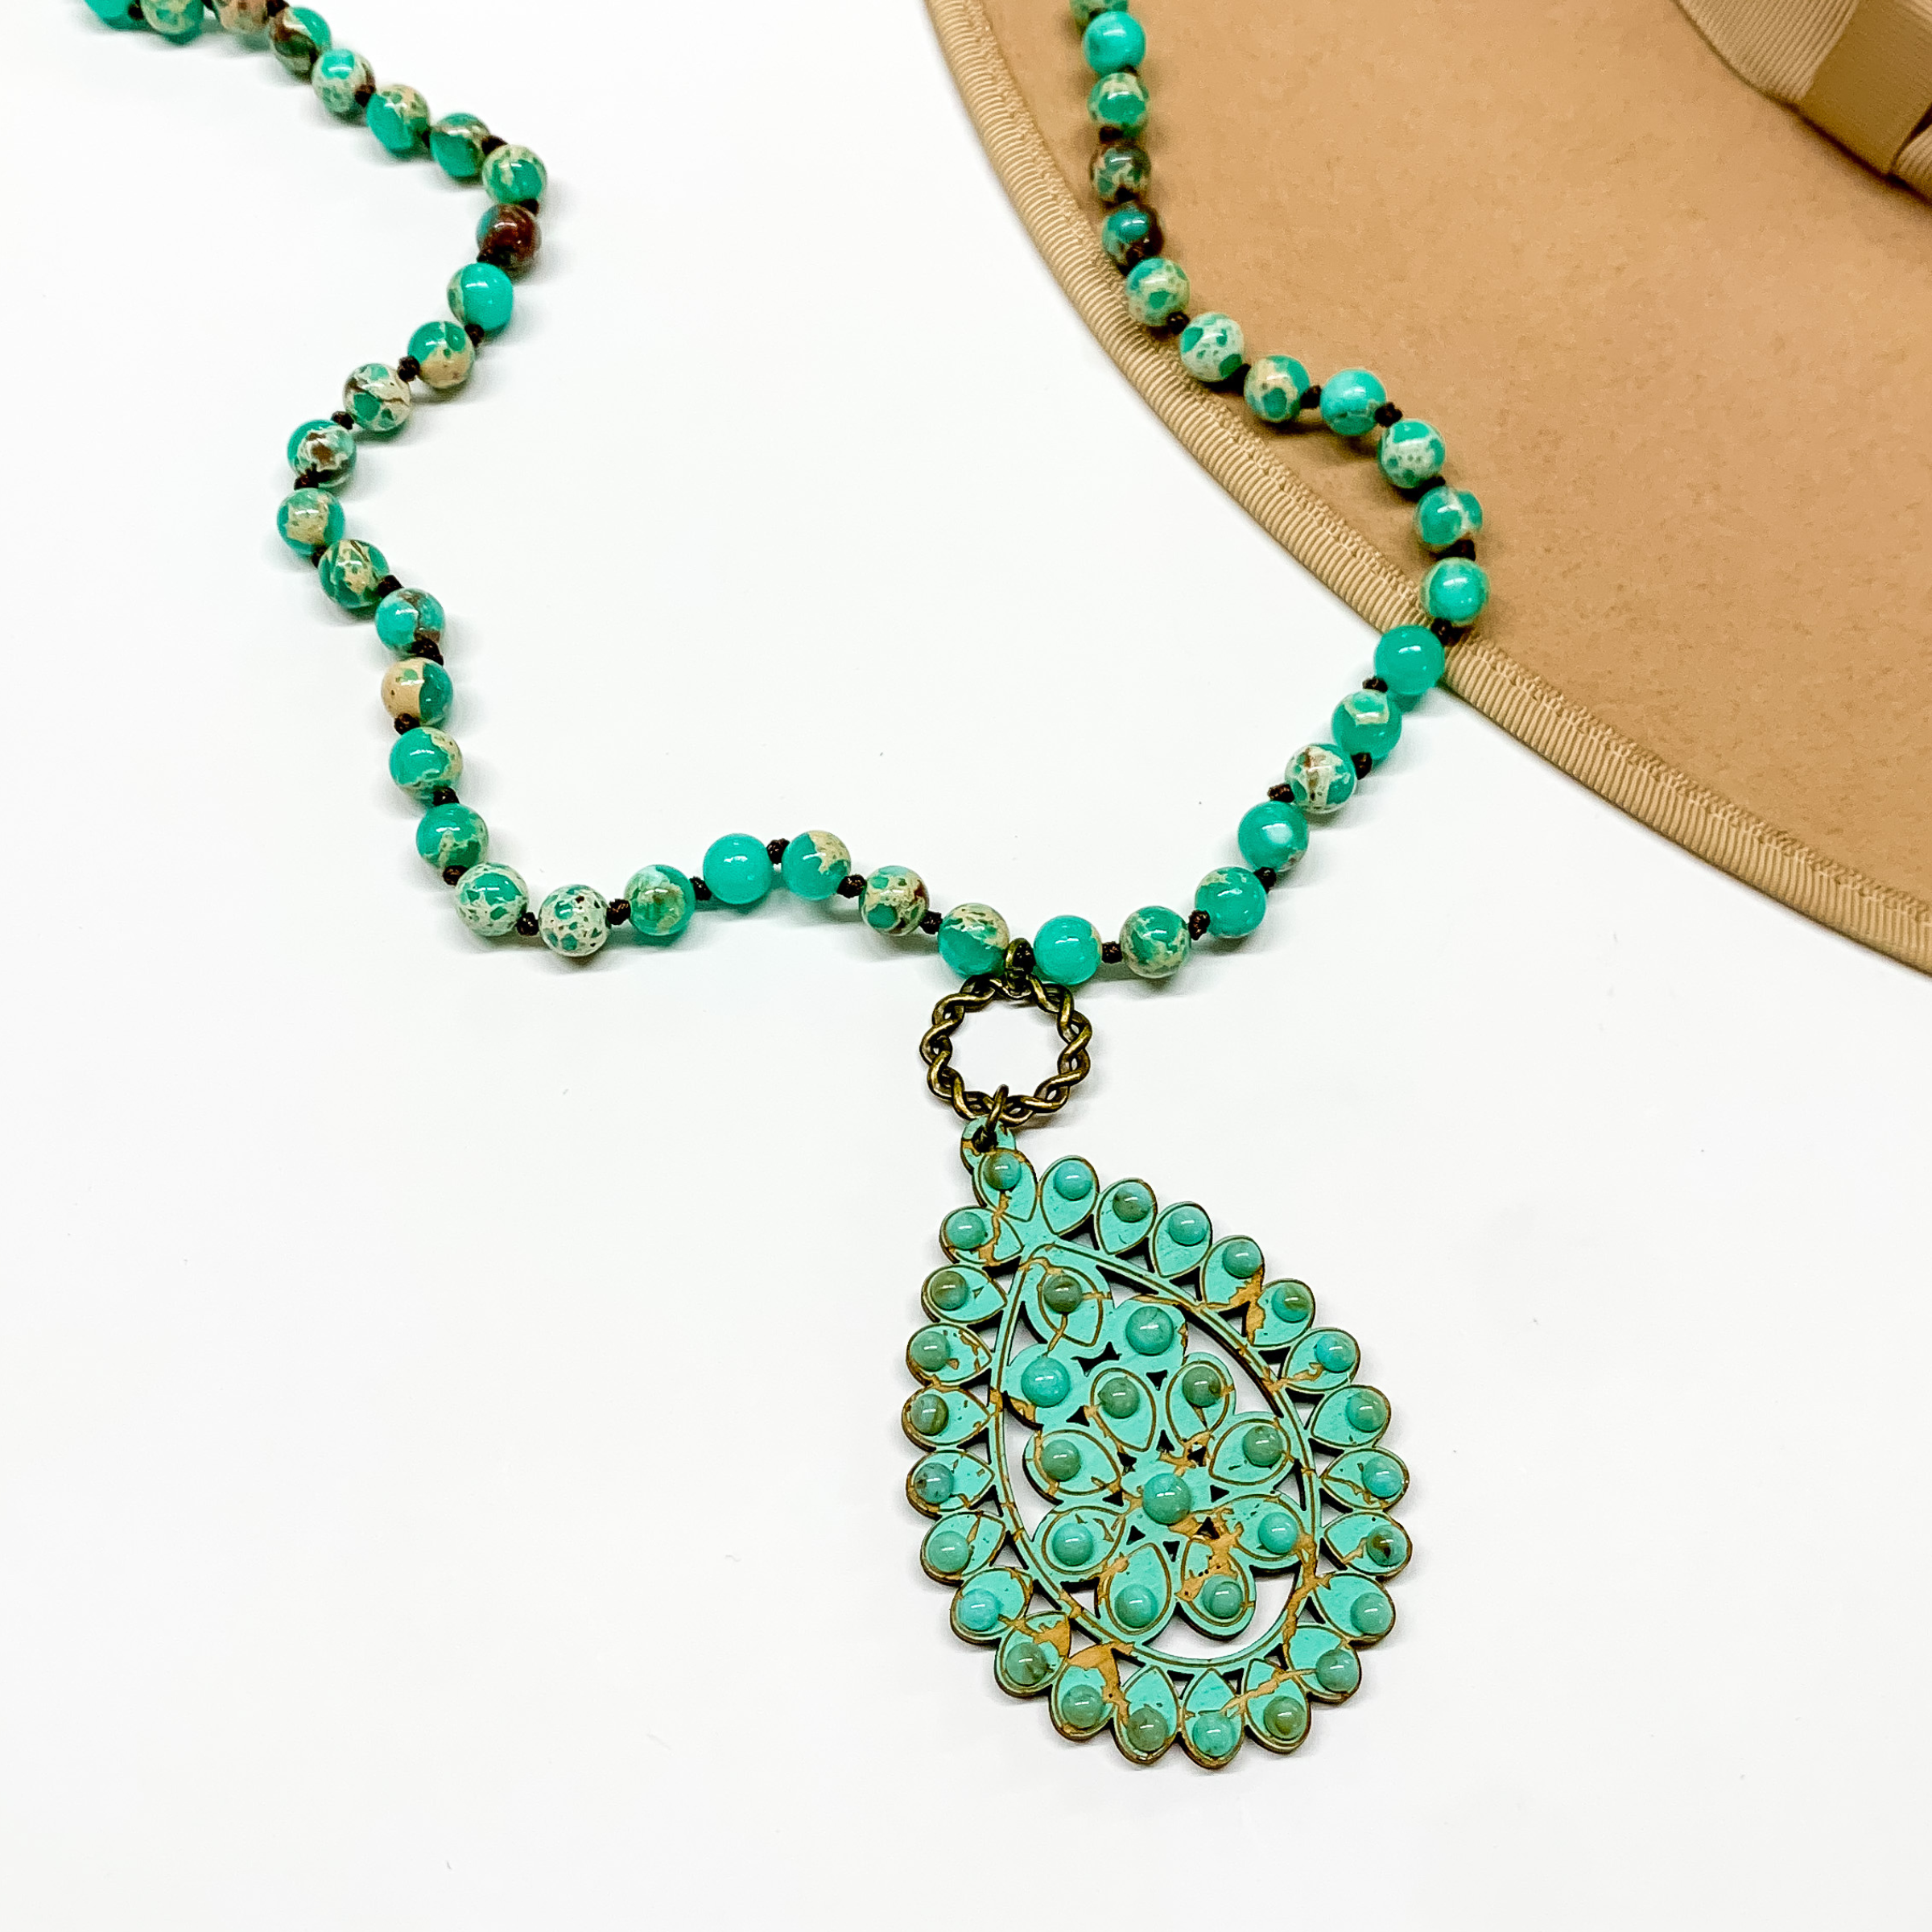 Turquoise beaded necklace with a turquoise teardrop pendant connected to th necklace by a bronze circle. This necklace is pictured on a white background with a tan hat brim in the top right corner. 